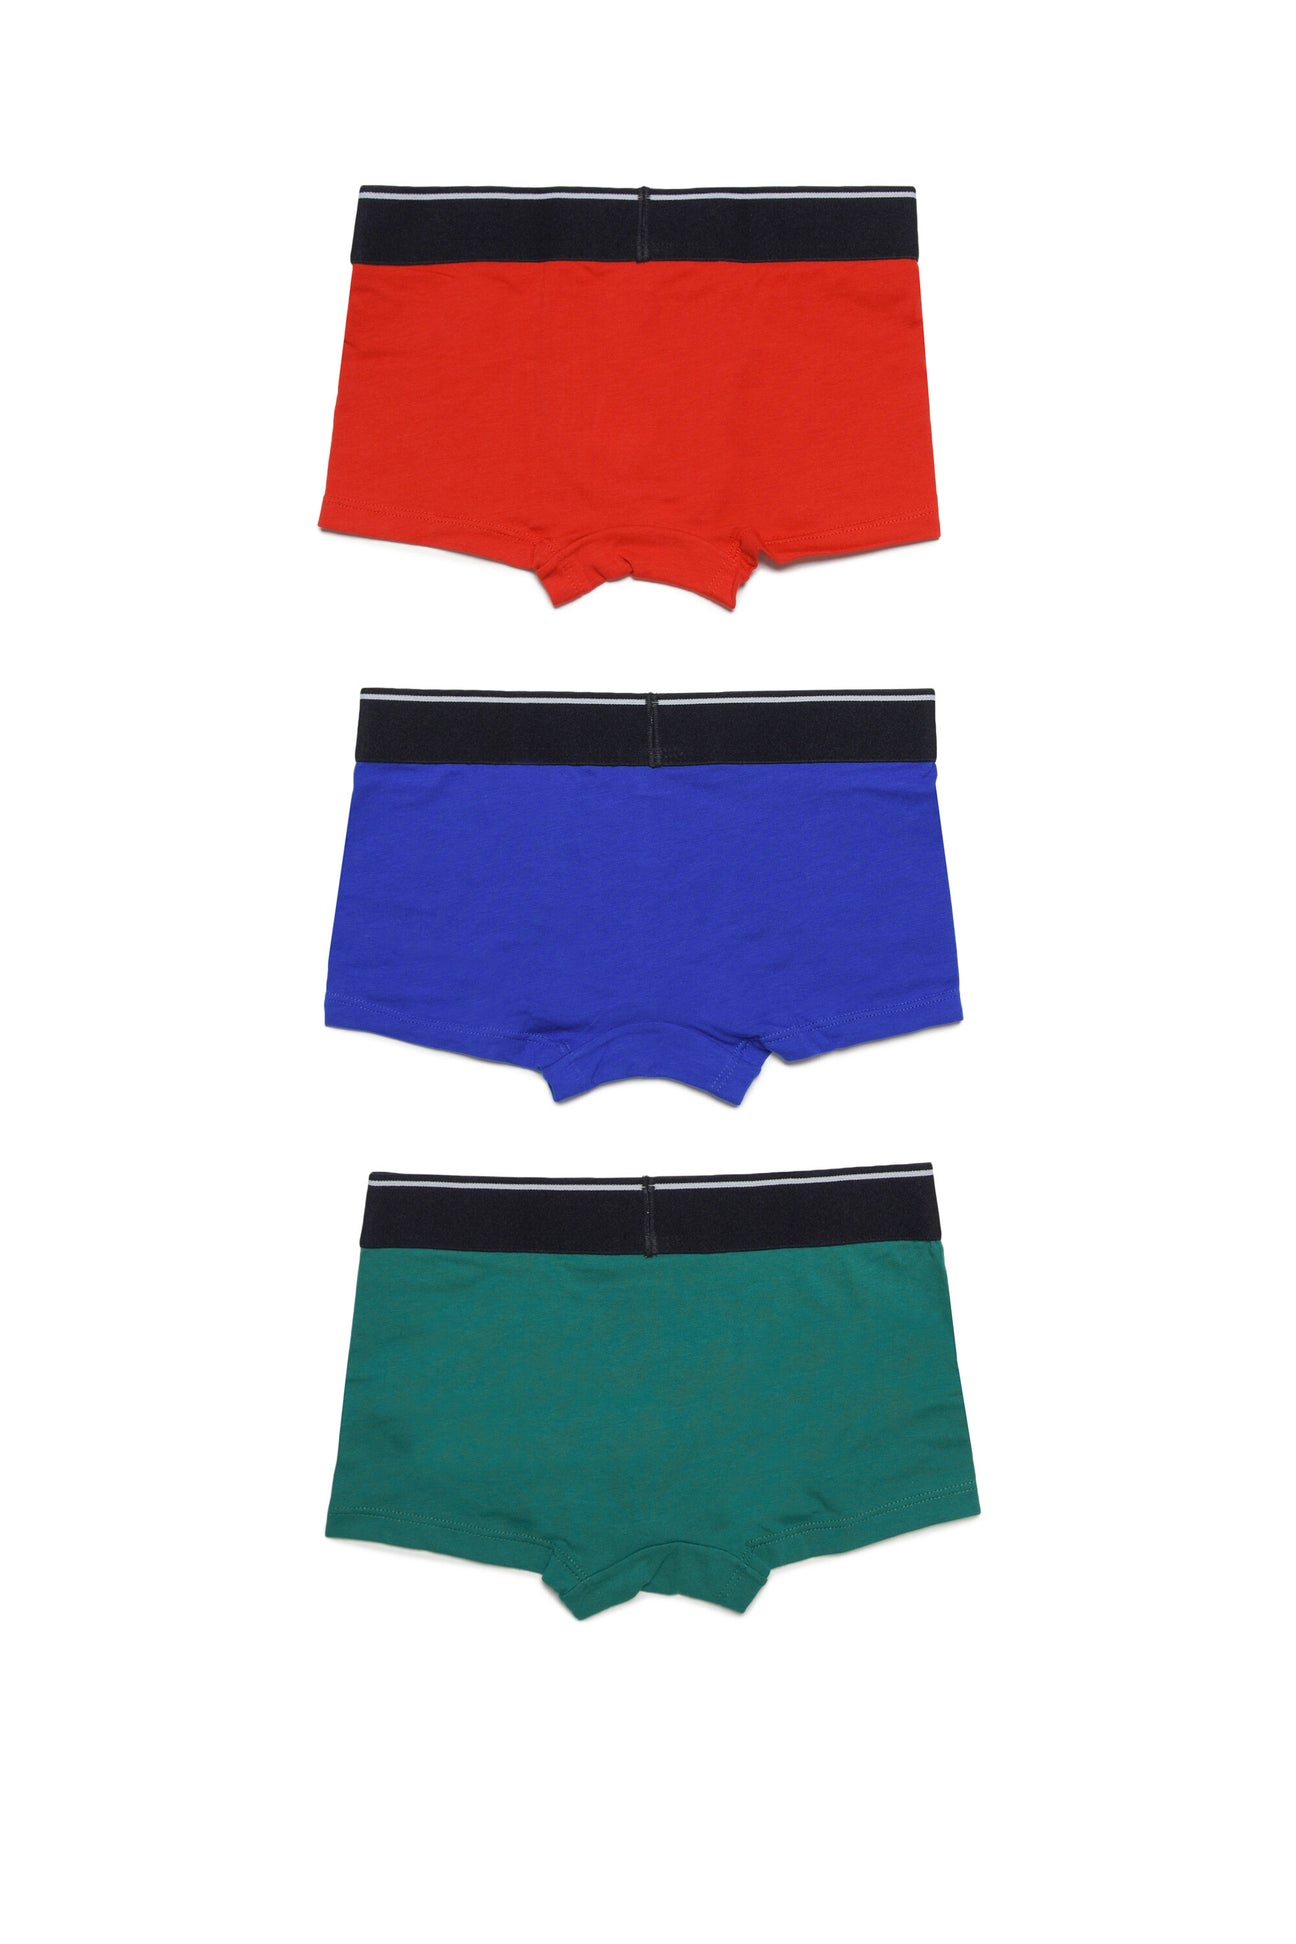 Set of 3 pairs of boxer shorts in various colors in stretch jersey with logoed elastic Set of 3 pairs of boxer shorts in various colors in stretch jersey with logoed elastic